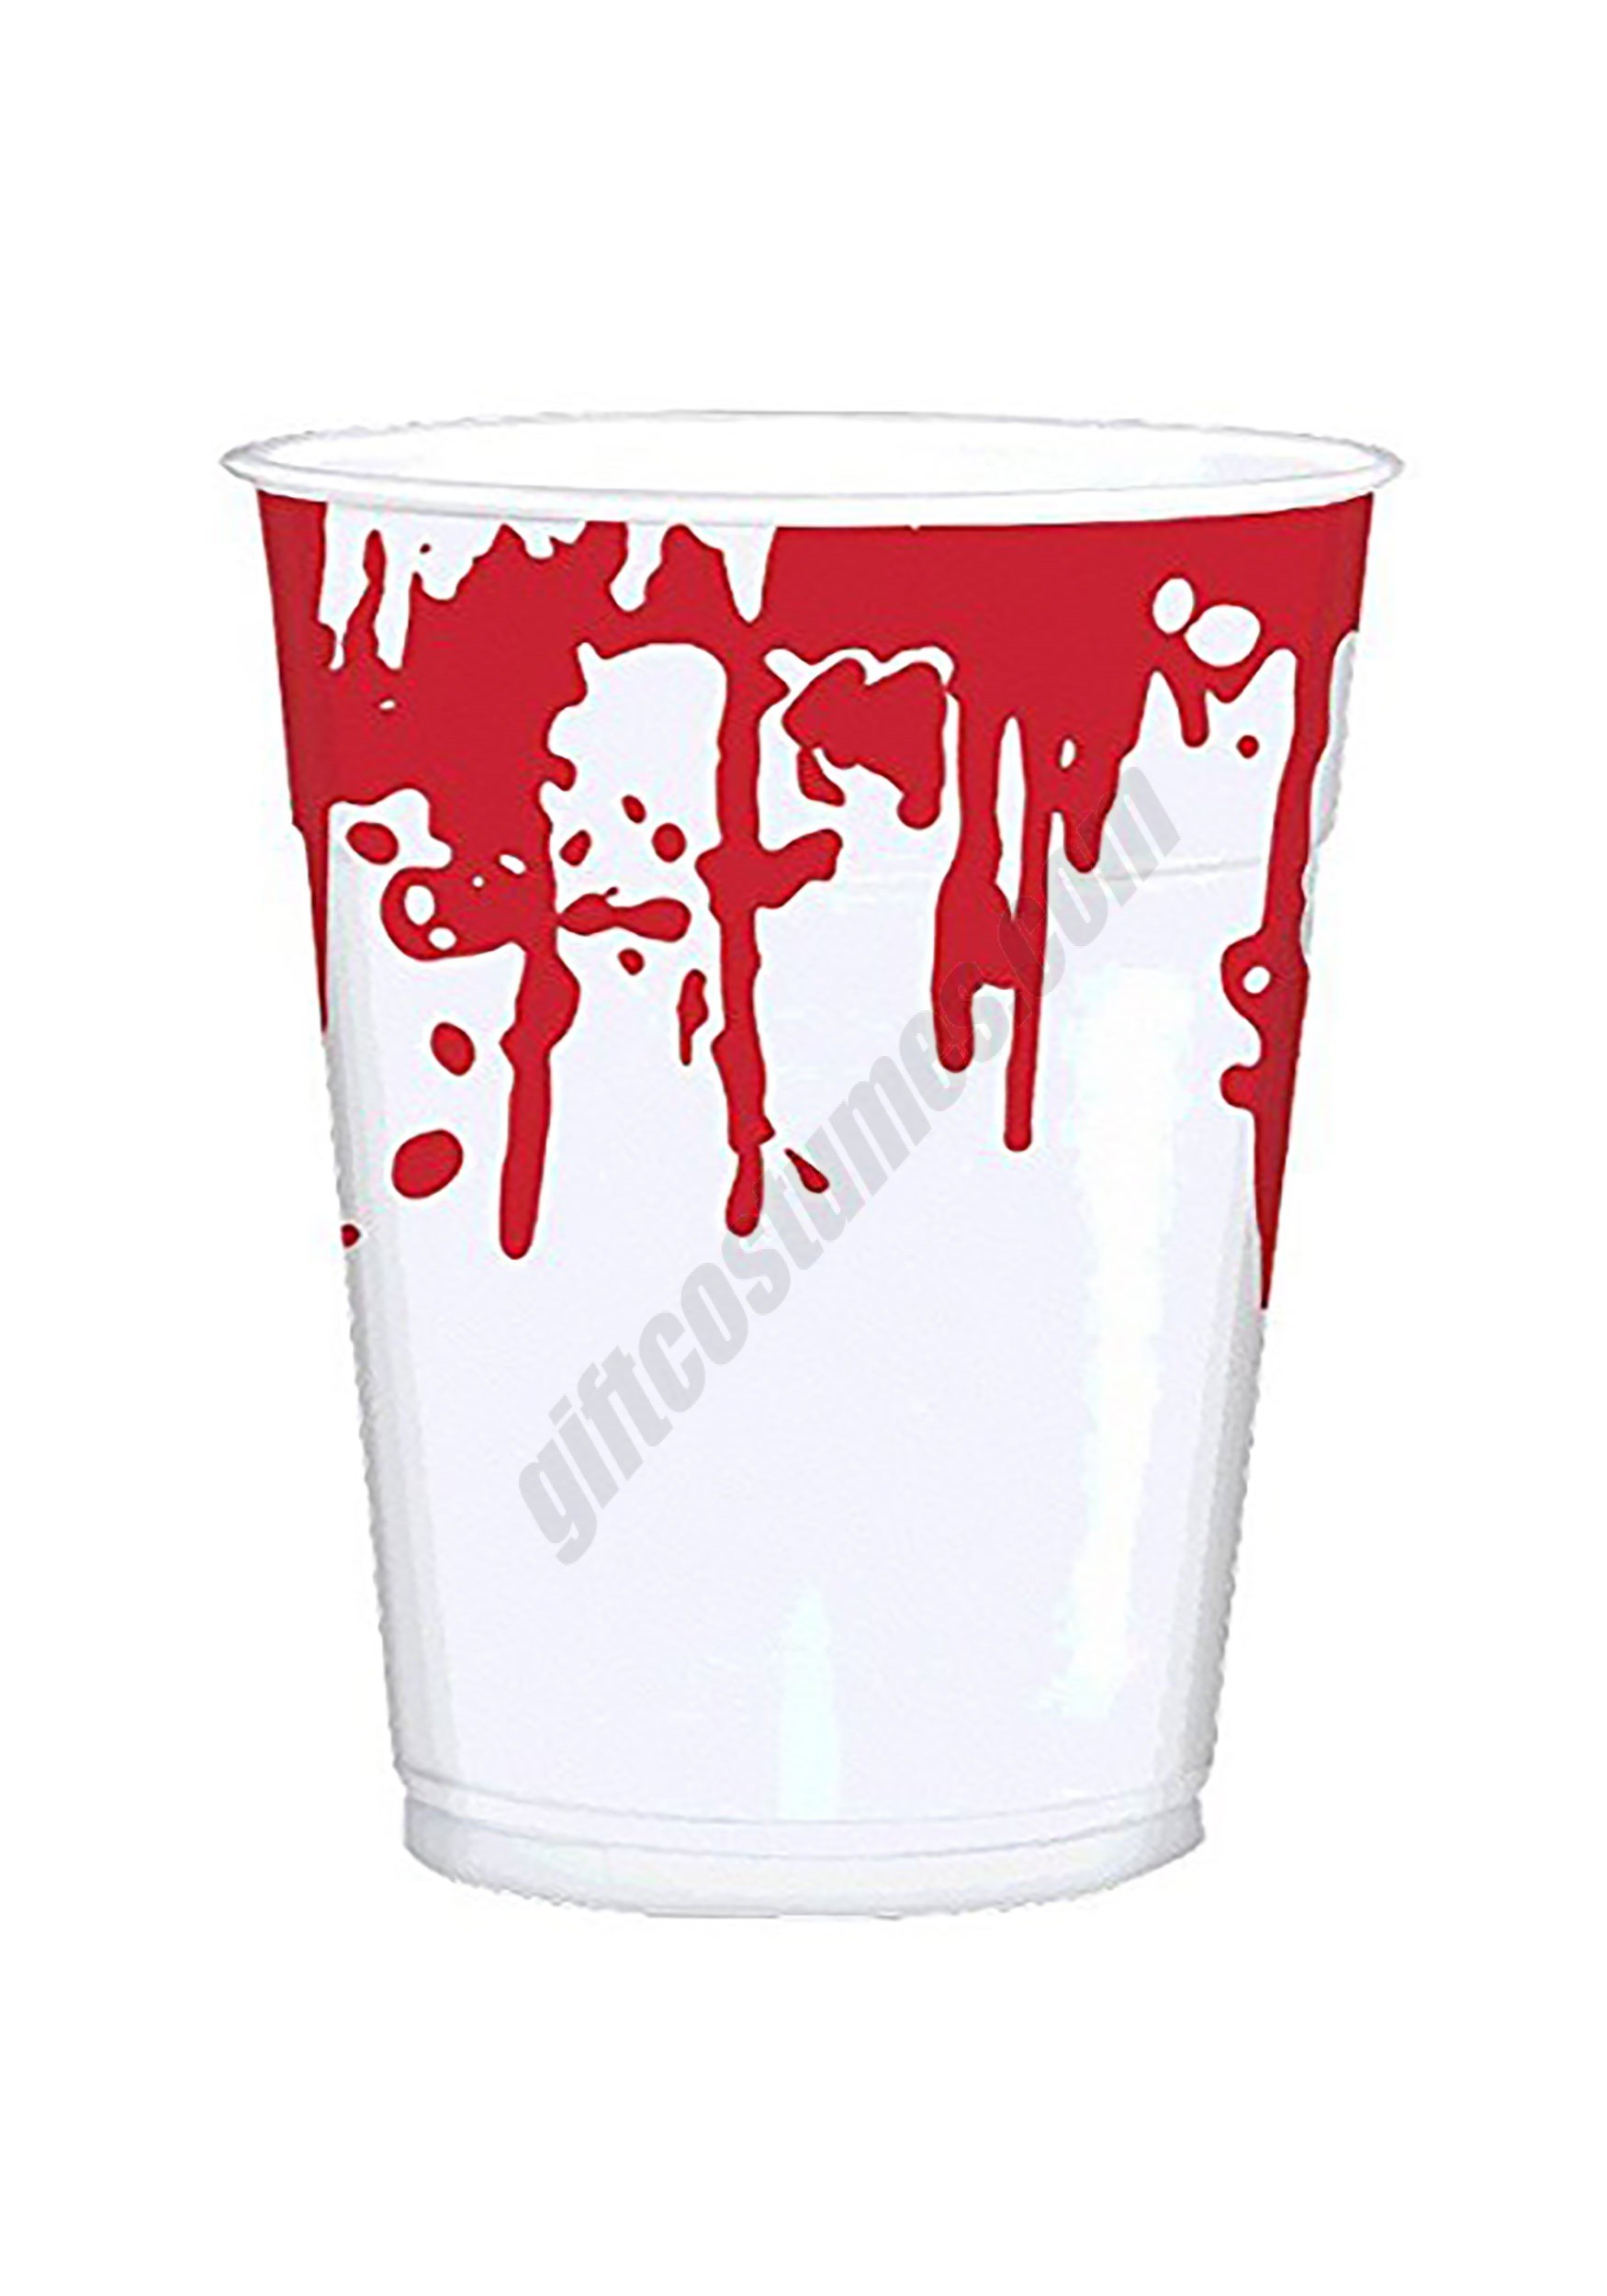 25 Ct. Halloween Bloody Hand Prints 16 oz. Party Cups Promotions - 25 Ct. Halloween Bloody Hand Prints 16 oz. Party Cups Promotions